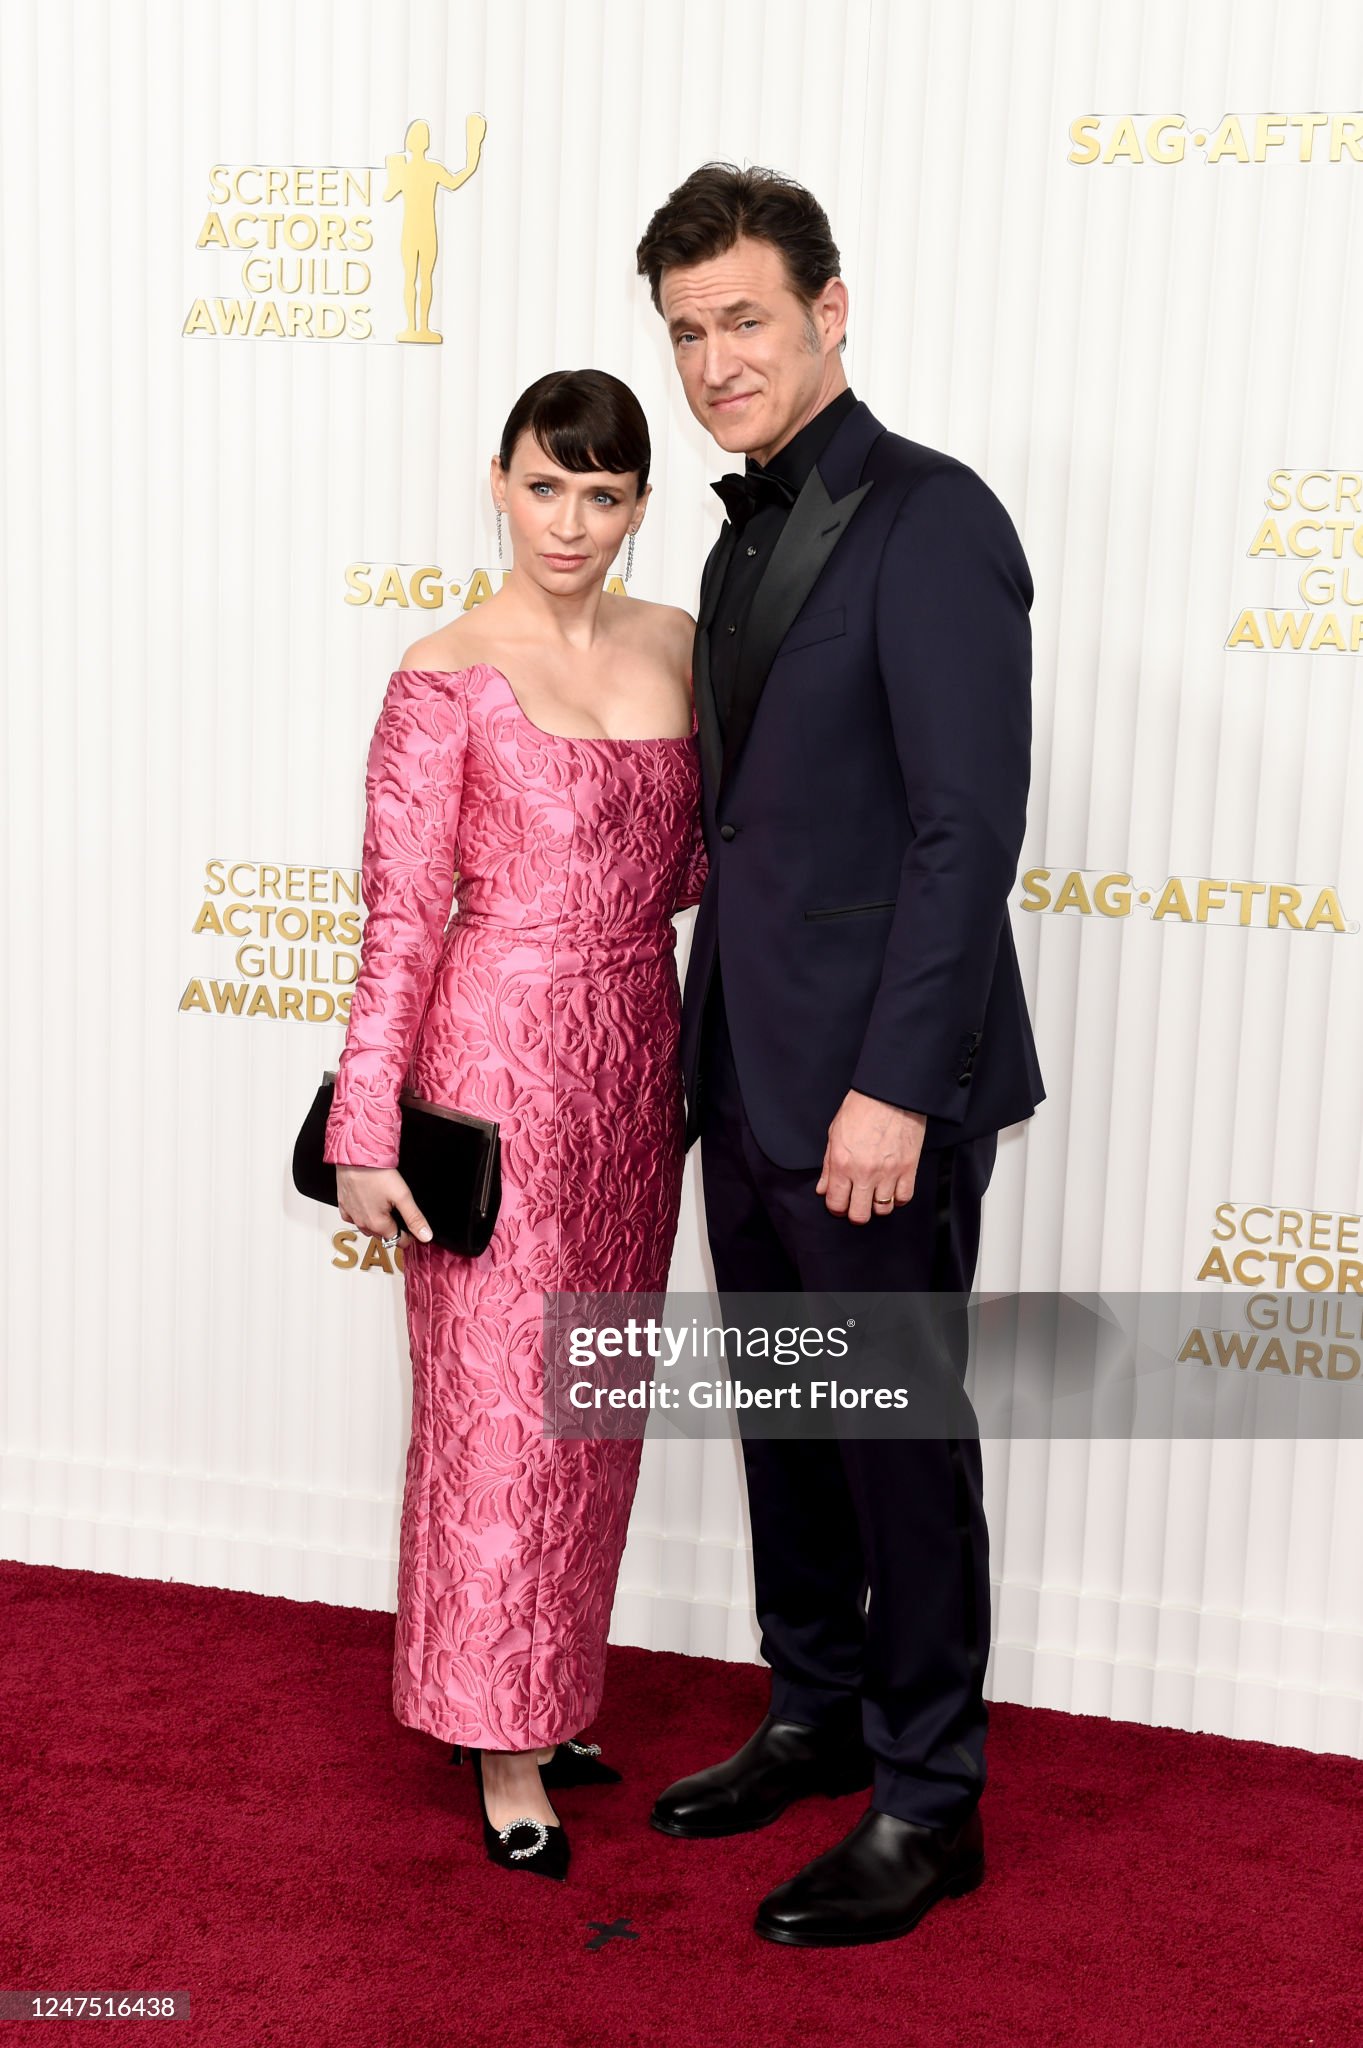 charlene-mckenna-and-adam-rothenberg-at-the-29th-annual-screen-actors-guild-awards-held-at-the.jpg